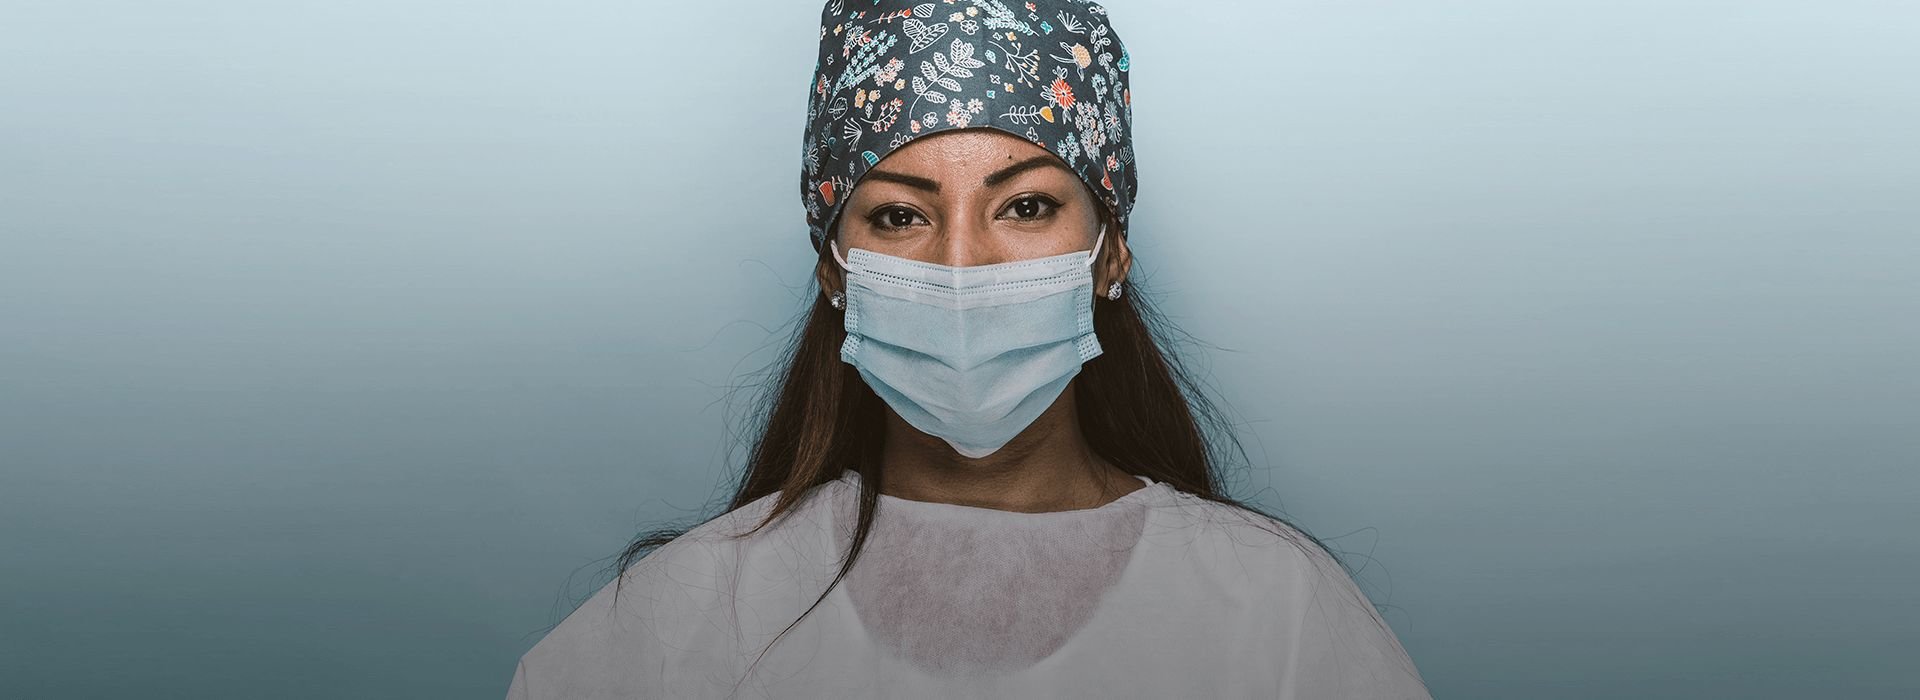 Woman in surgical hat and facemask